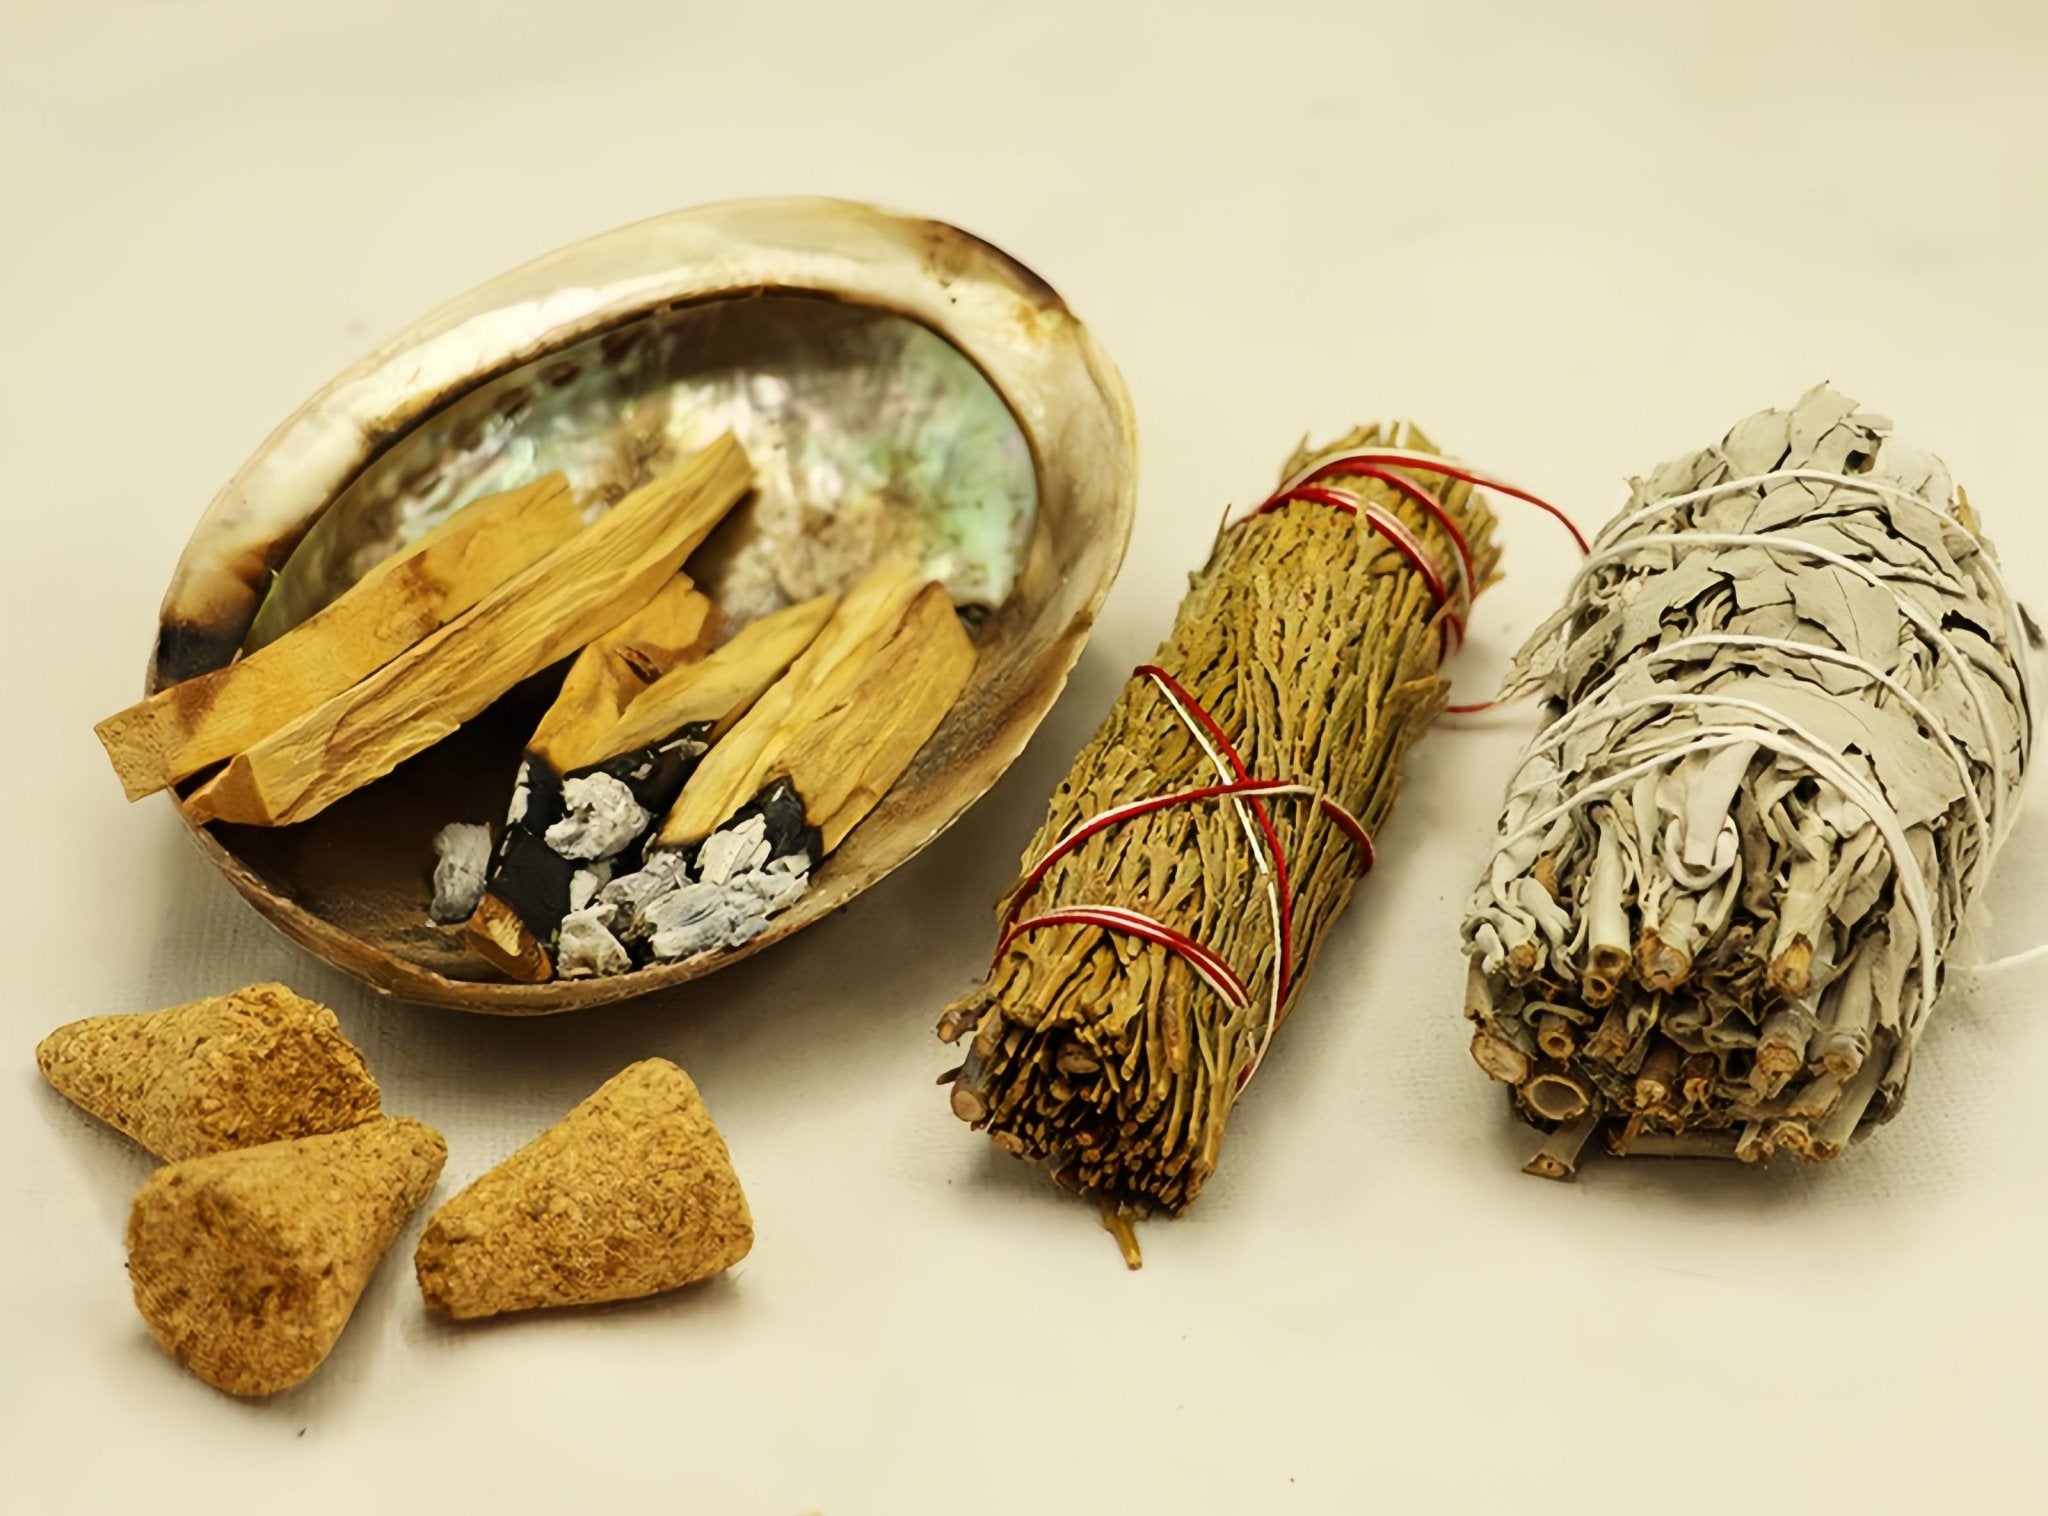 Overview of Palo Santo wood and other cleansing ritual accessories.